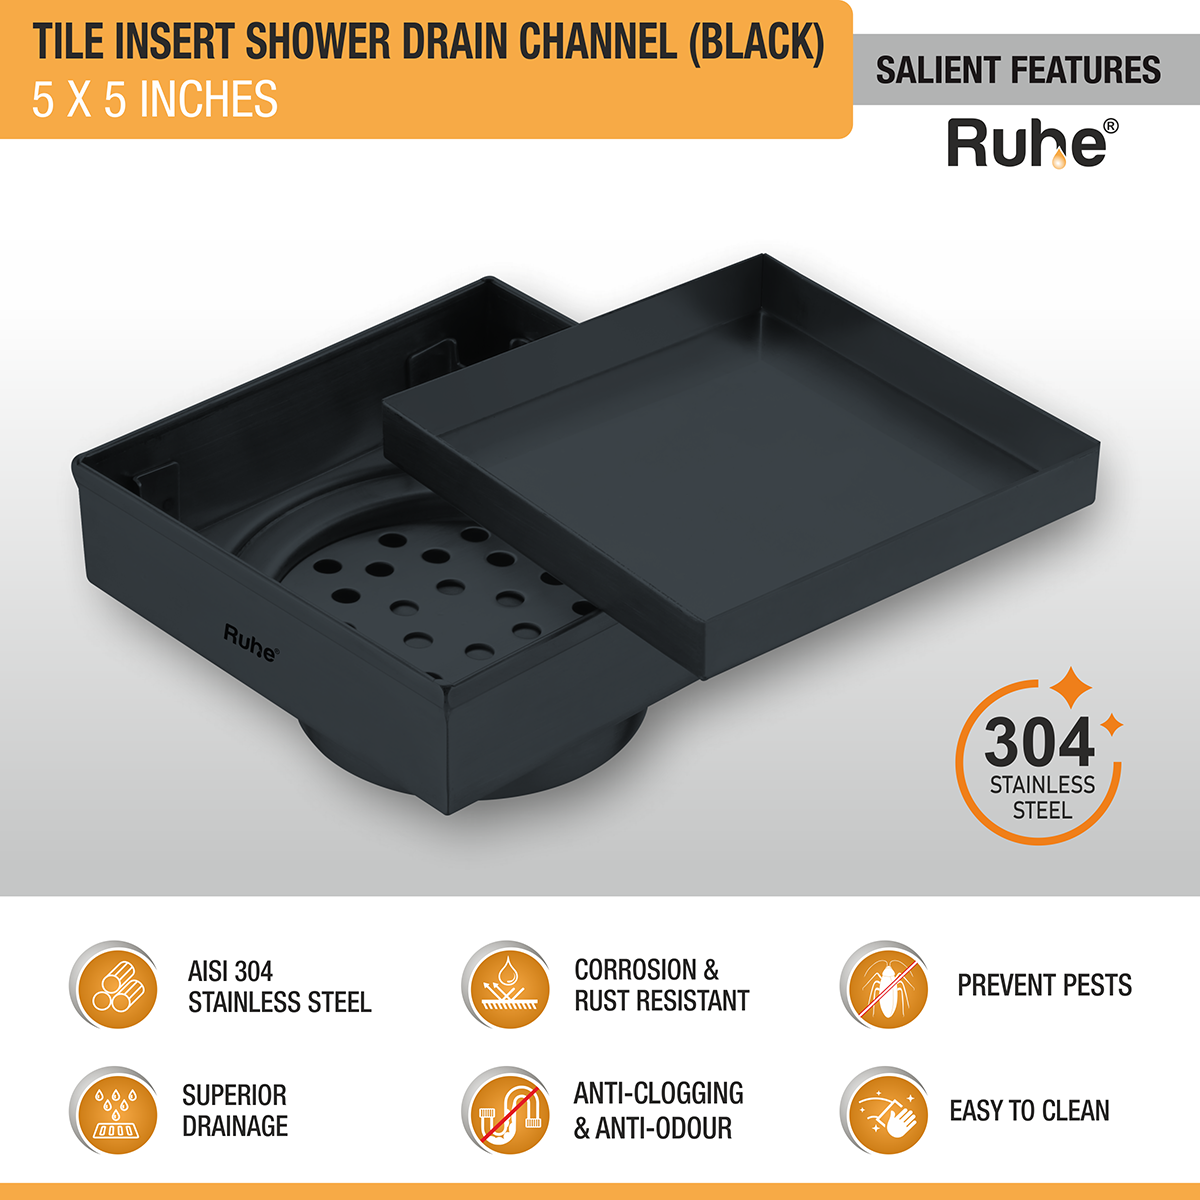 Tile Insert Shower Drain Channel (5 x 5 Inches) Black PVD Coated features and benefits